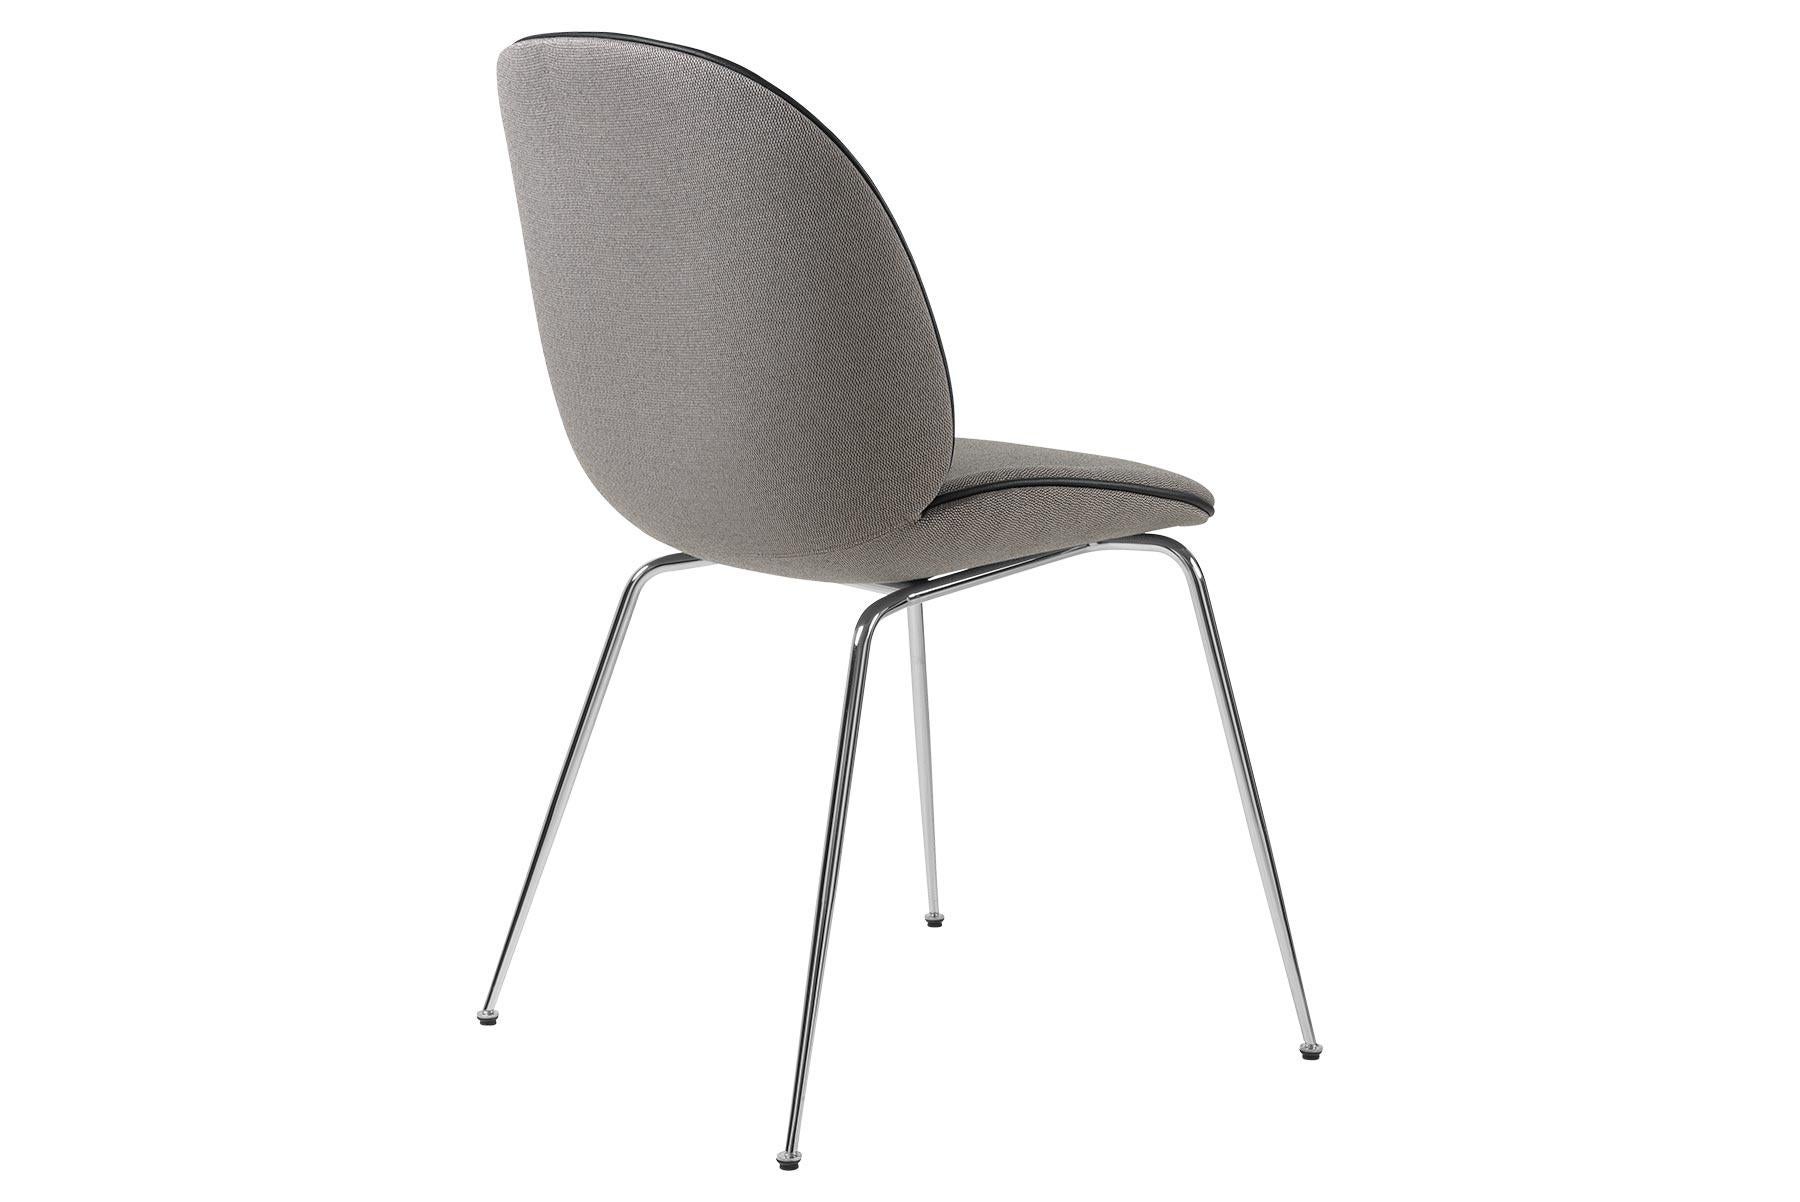 The Beetle Chair has since its introduction in 2013 being well received by end-consumers as well as interior architects. Due to its appealing design, outstanding comfort and unique customization possibilities, the chair can be seen in many of the